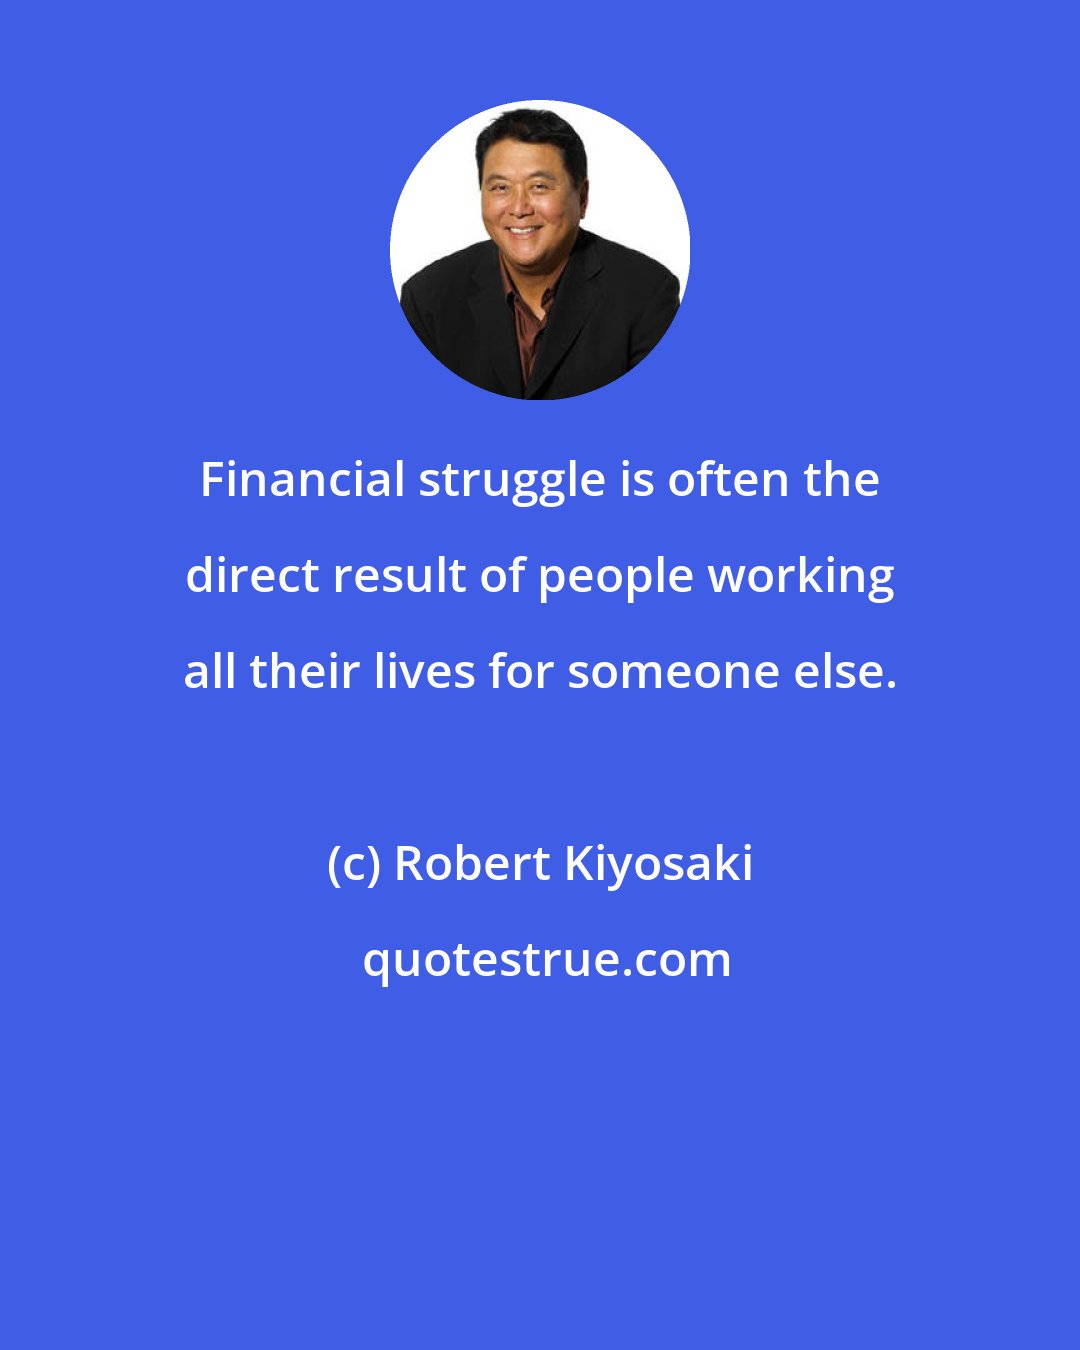 Robert Kiyosaki: Financial struggle is often the direct result of people working all their lives for someone else.